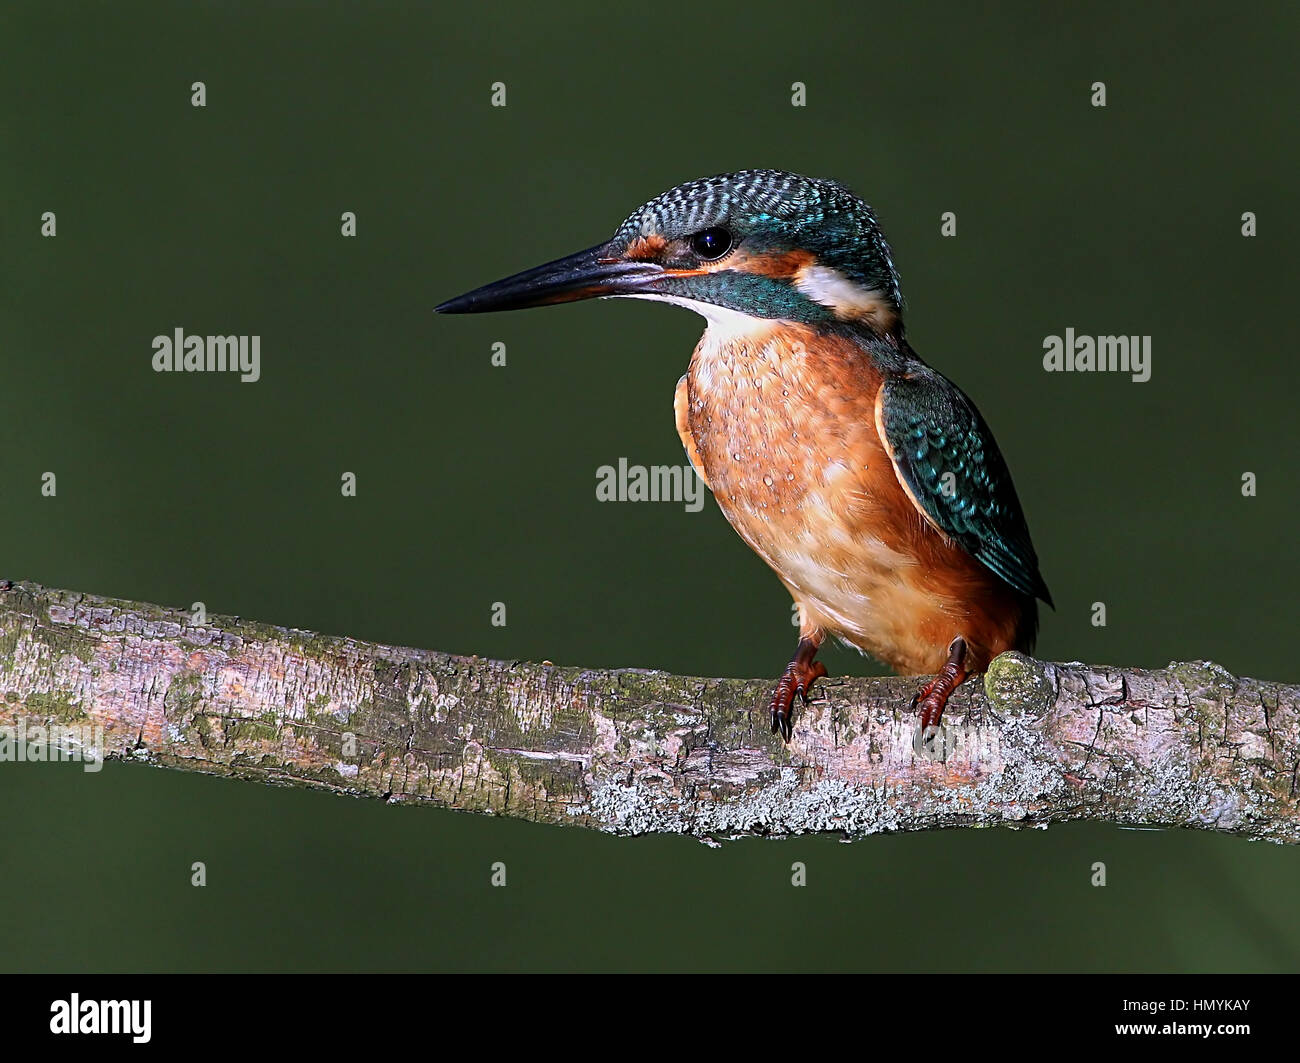 Male European Kingfisher (Alcedo Atthis) posing on a branch Stock Photo